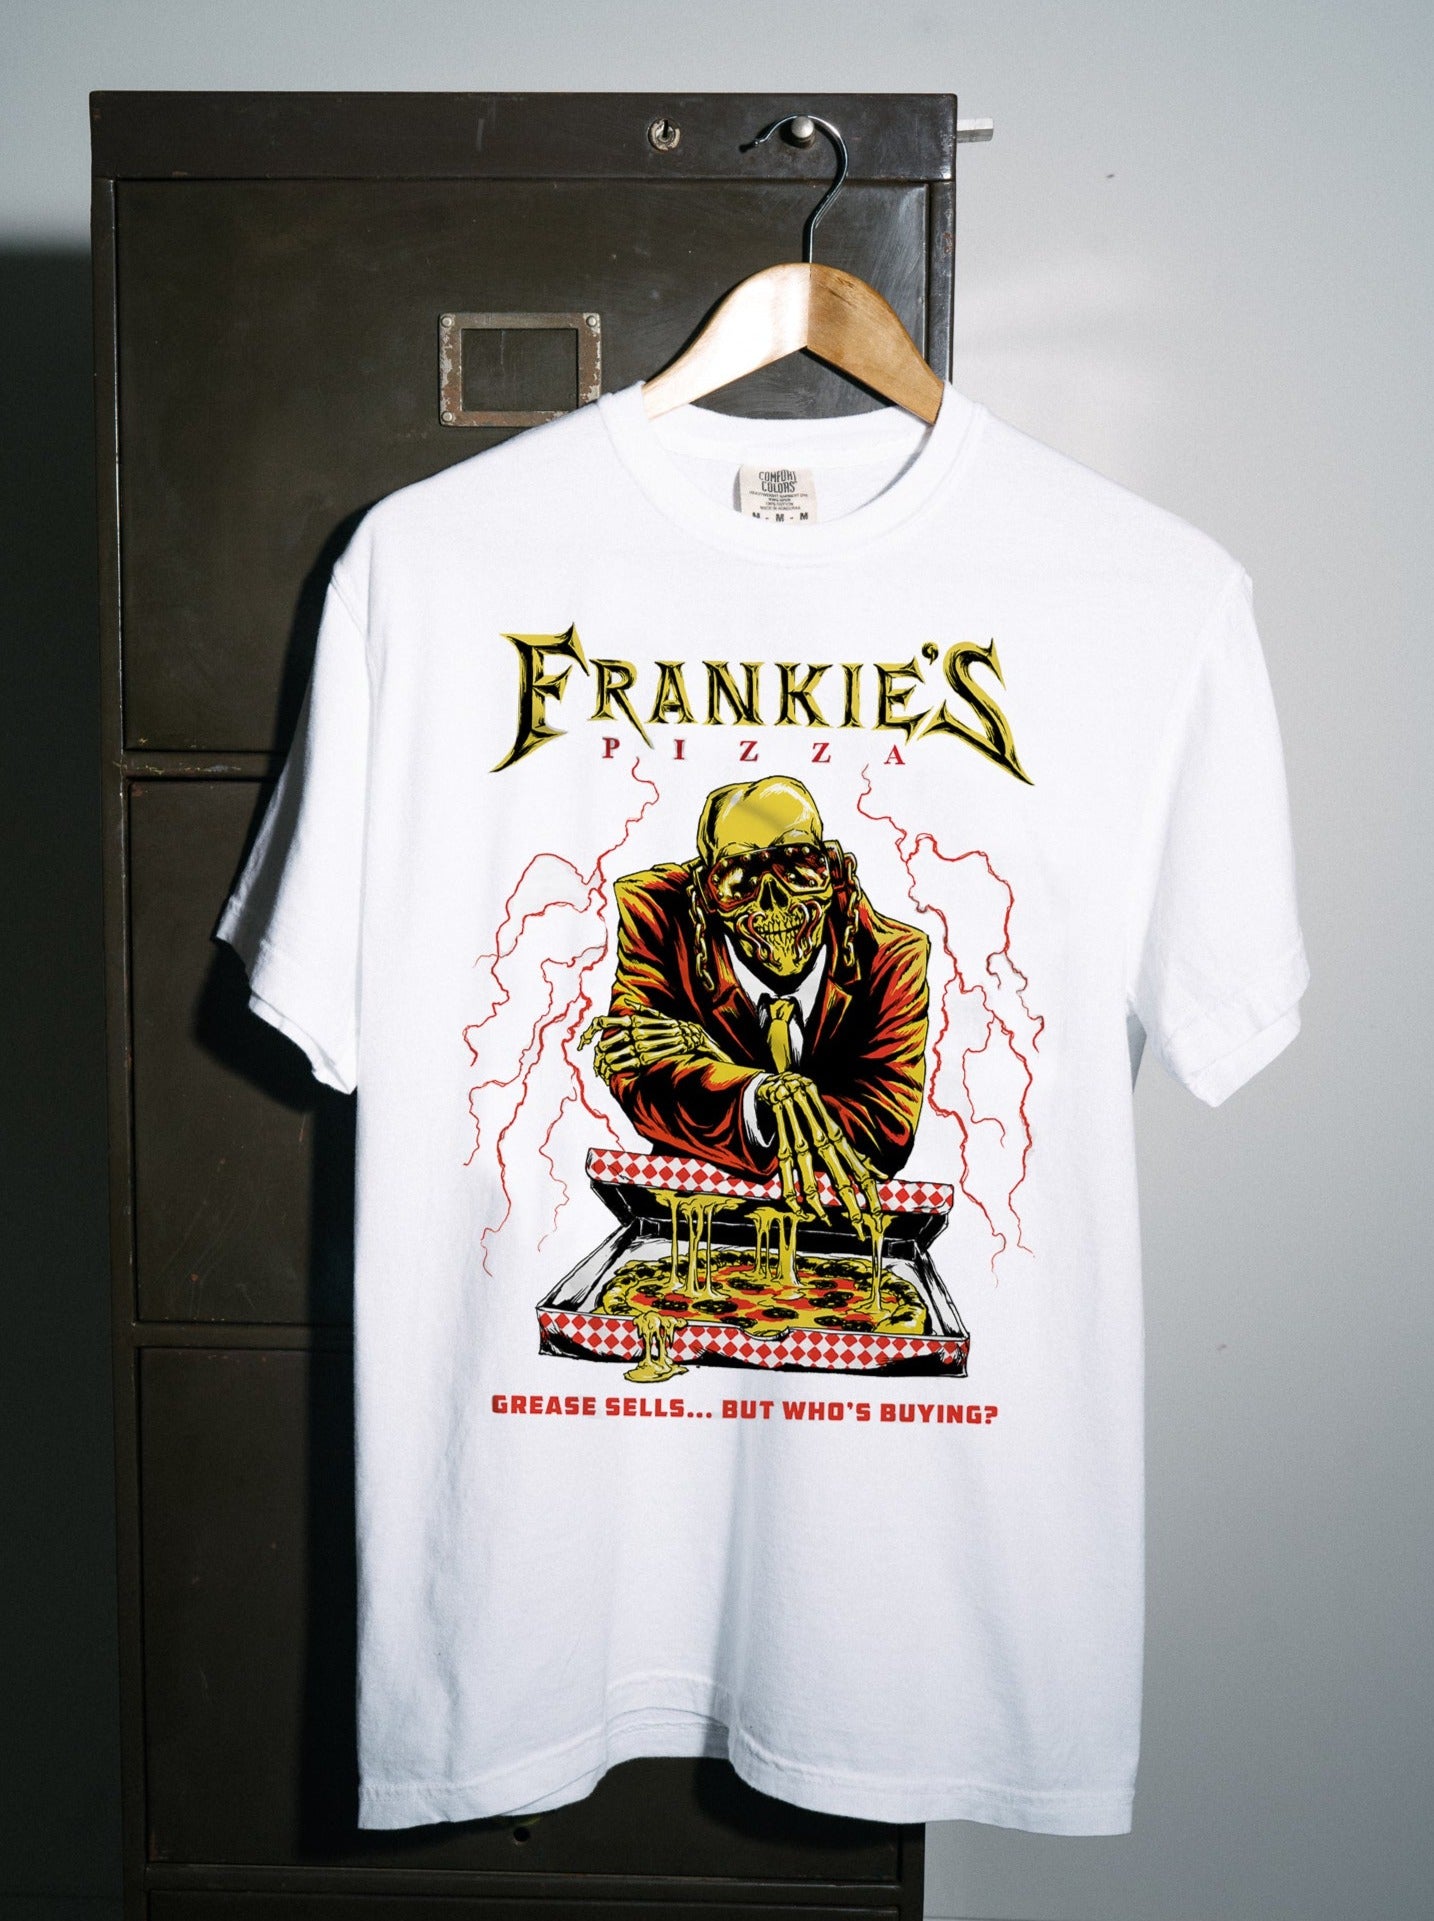 Frankie's Pizza Grease Sells... T-Shirt